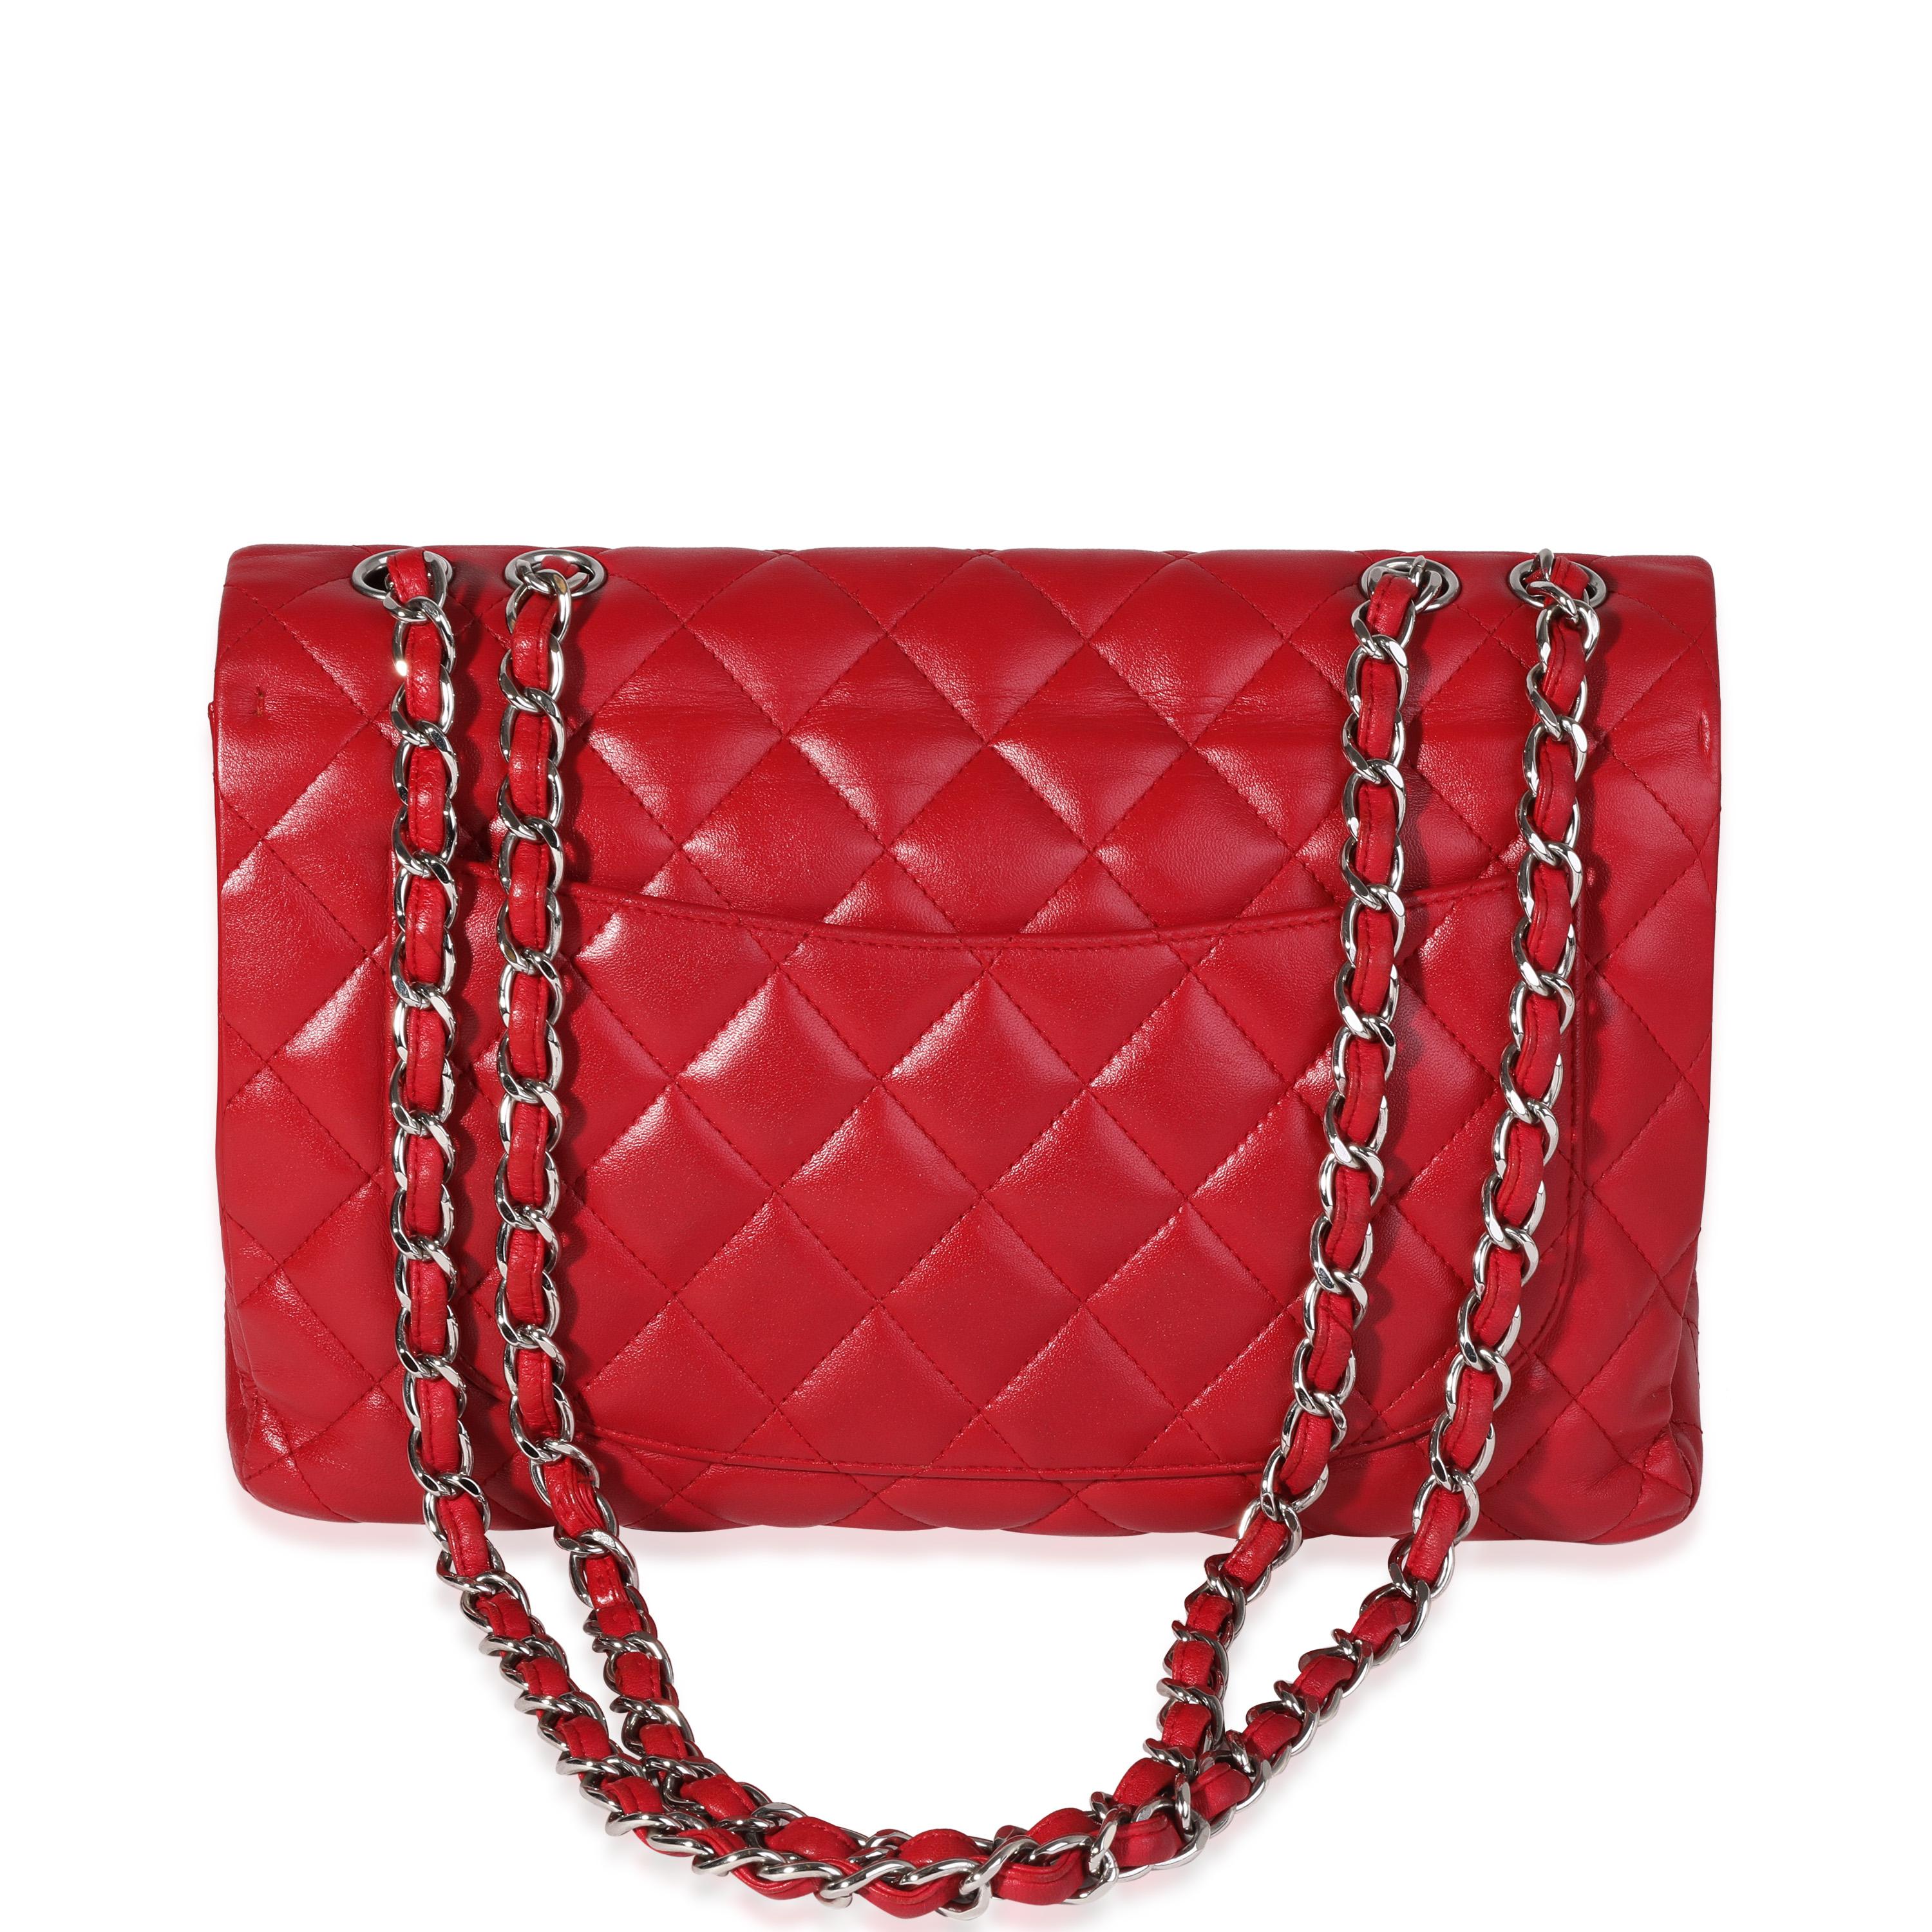 Listing Title: Chanel Red Quilted Lambskin Jumbo Classic Single Flap Bag
SKU: 120351
MSRP: 9500.00
Condition: Pre-owned 
Handbag Condition: Very Good
Condition Comments: Very Good Condition. Re-Painted. Creasing to exterior leather. Light scratching